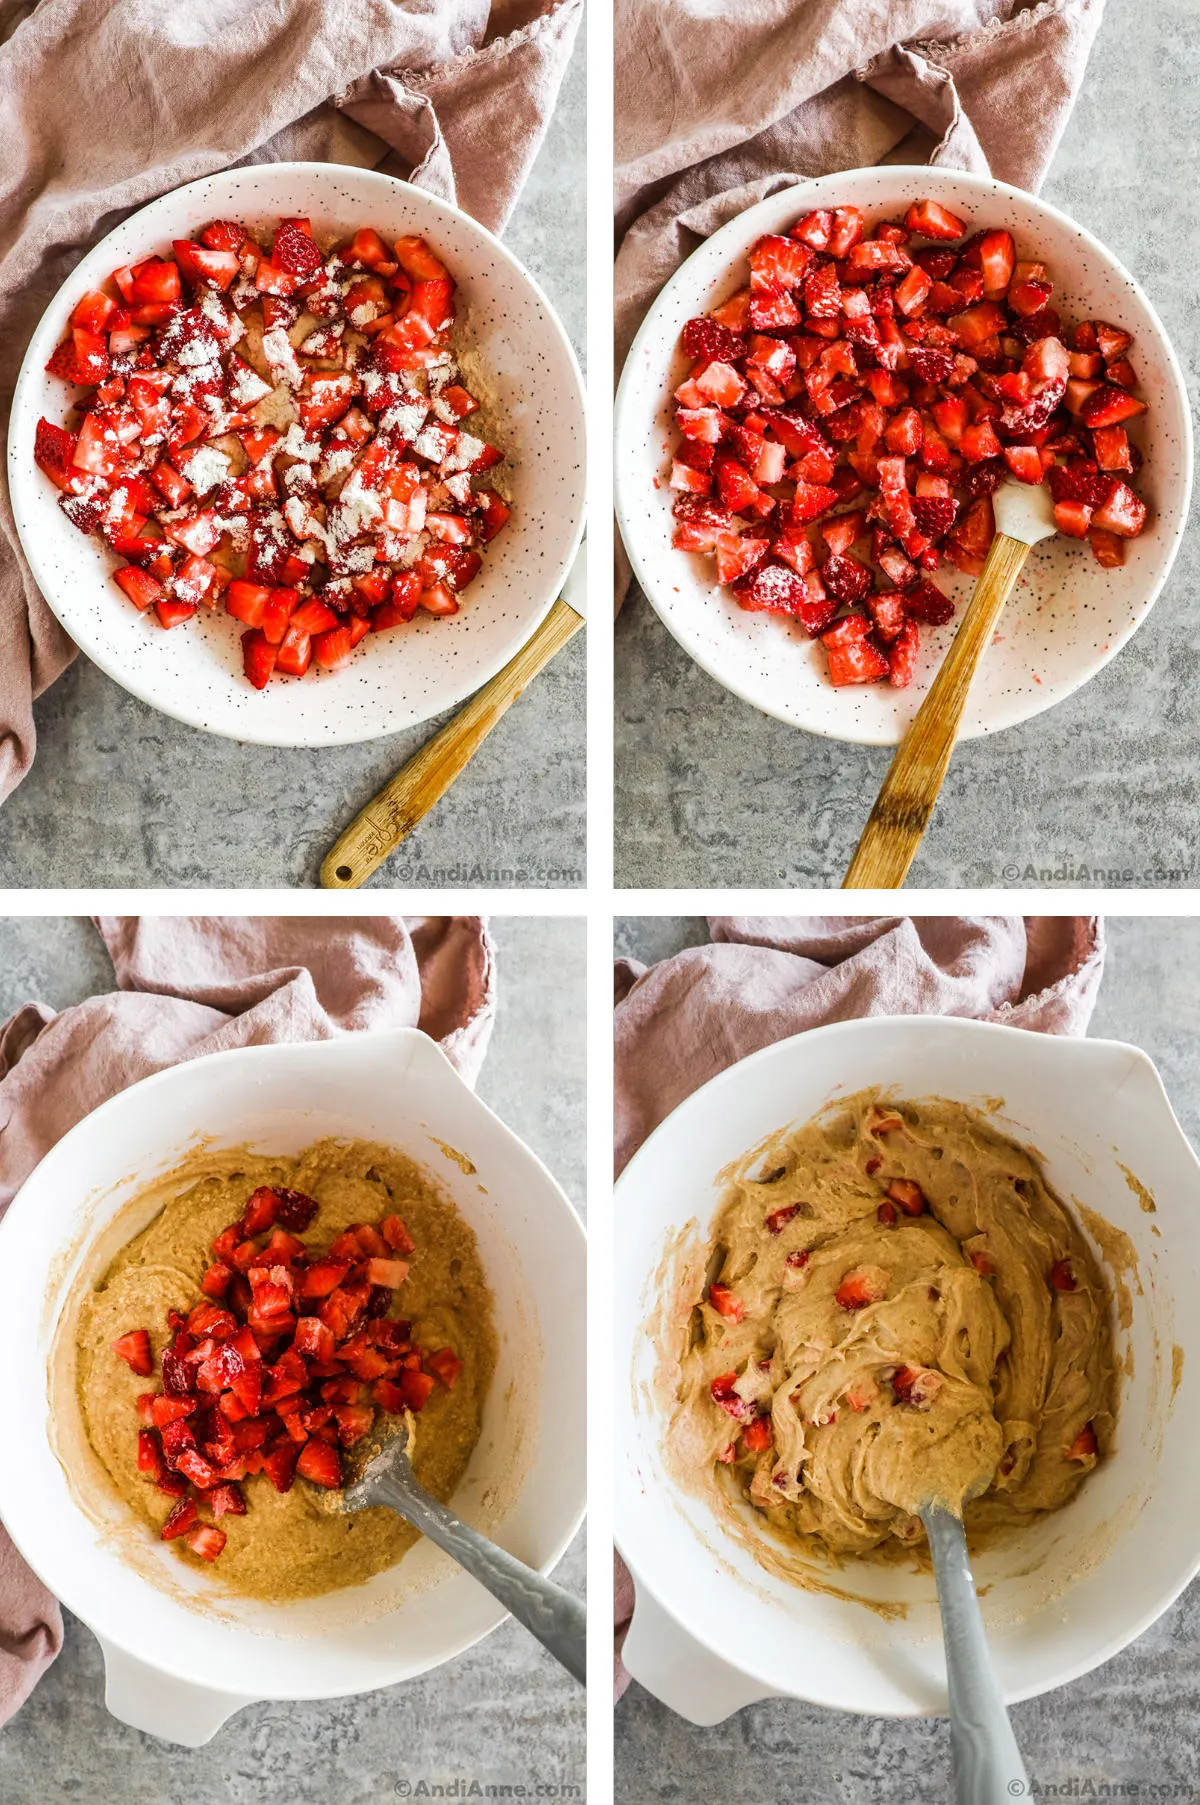 Four overhead images in one: 1. Flour is added to sliced strawberries in a shallow white bowl. 2. Strawberries are mixed with flour. 3. Strawberries are added to batter in large white bowl. 4. Strawberries are folded into. batter with spatula. 